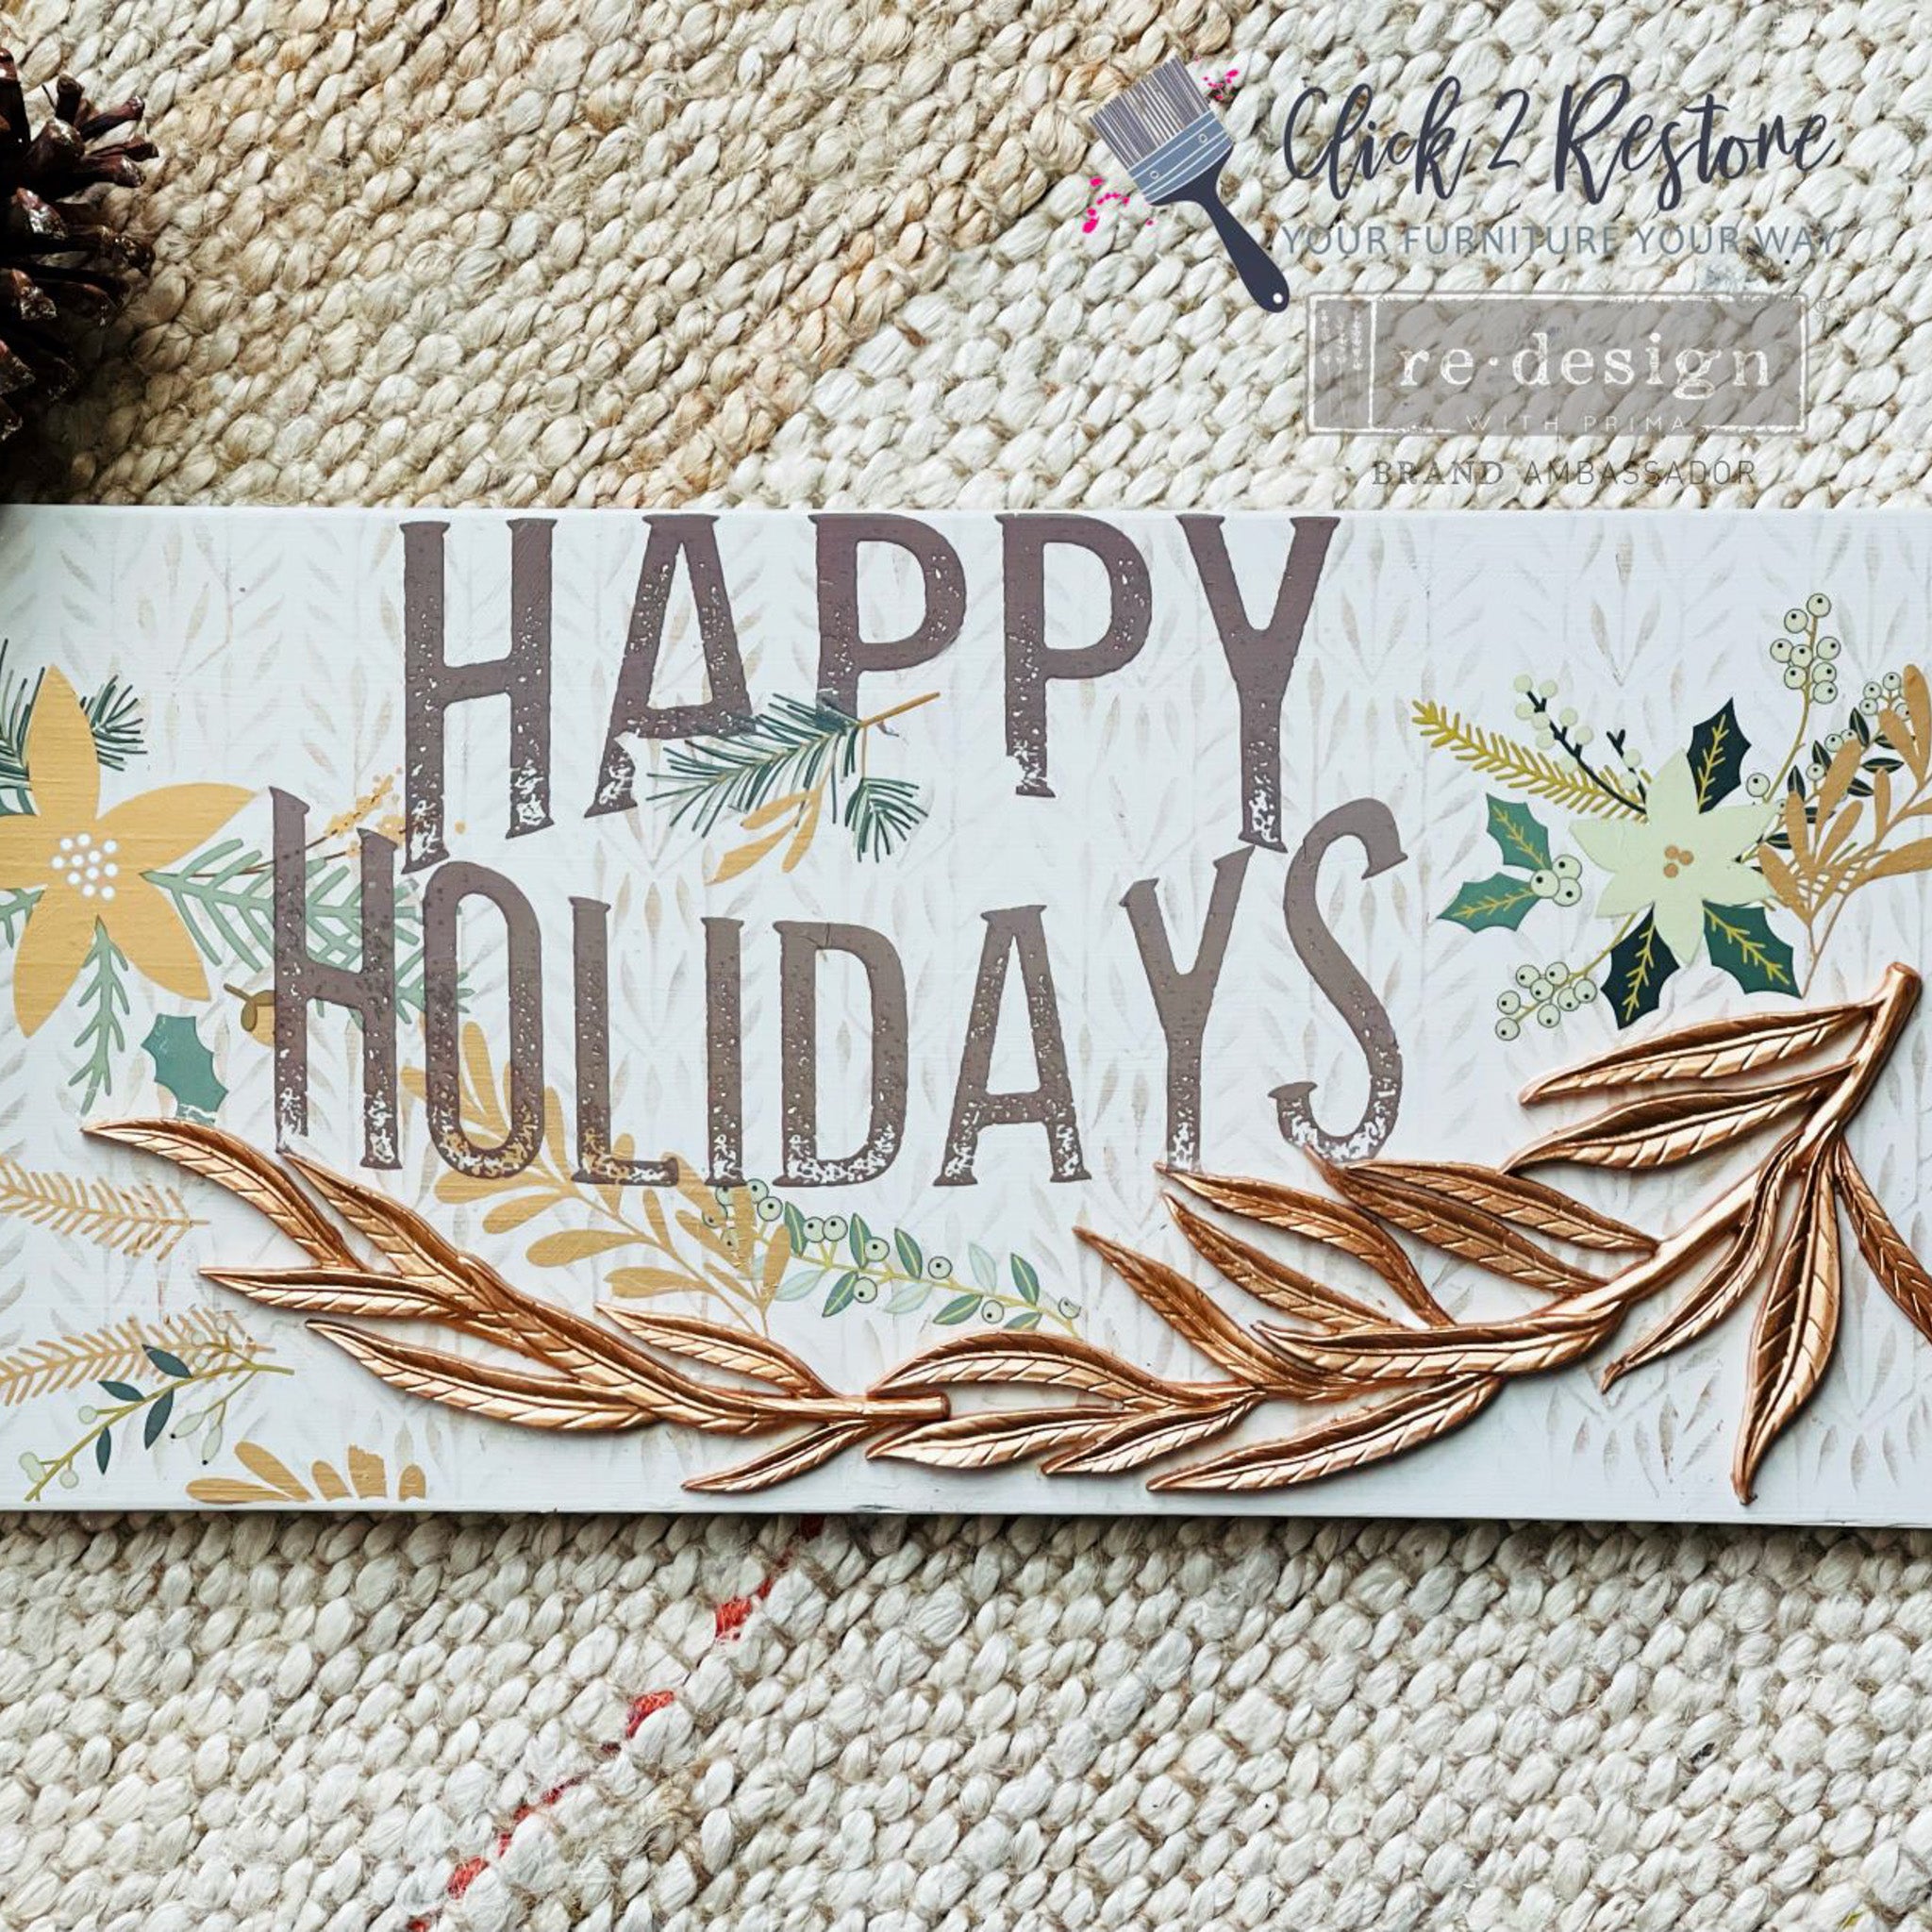 A small wood craft created by Click 2 Restore features ReDesign with Prima's Holiday Spirit small transfer on it.